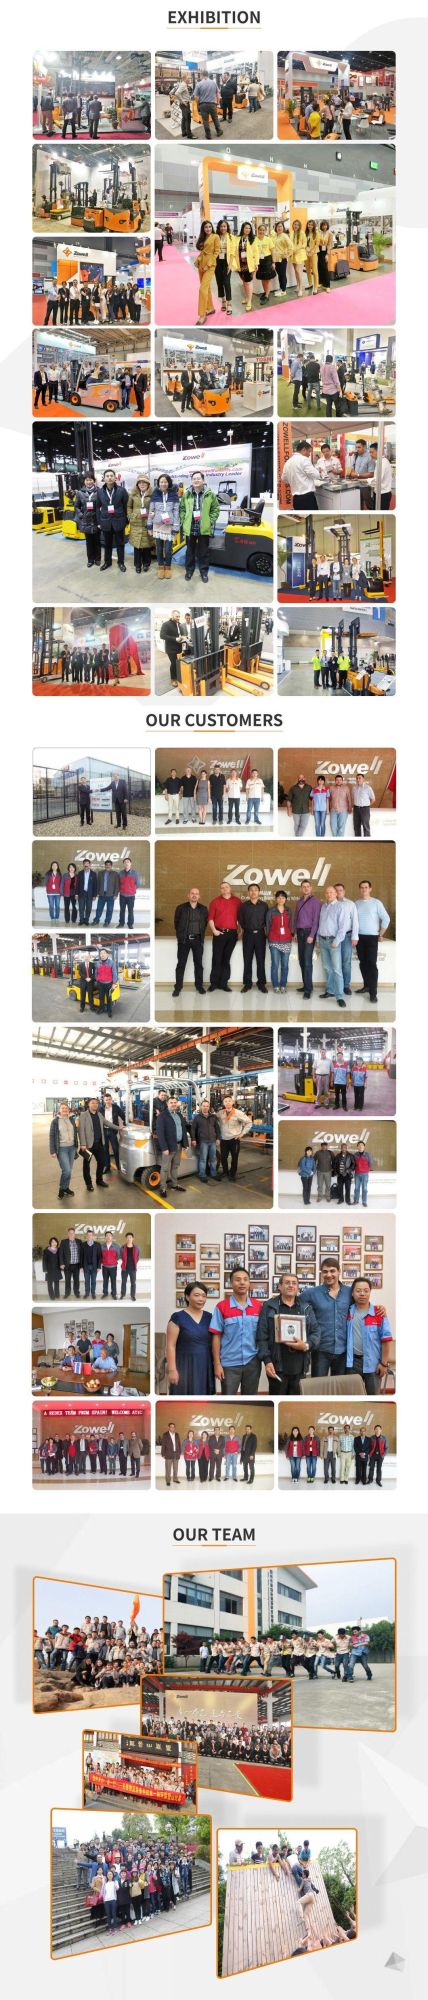 Electric Adjustable Zowell Wooden Pallet 3540*1265mm Suzhou, China Chinese Brand Forklift